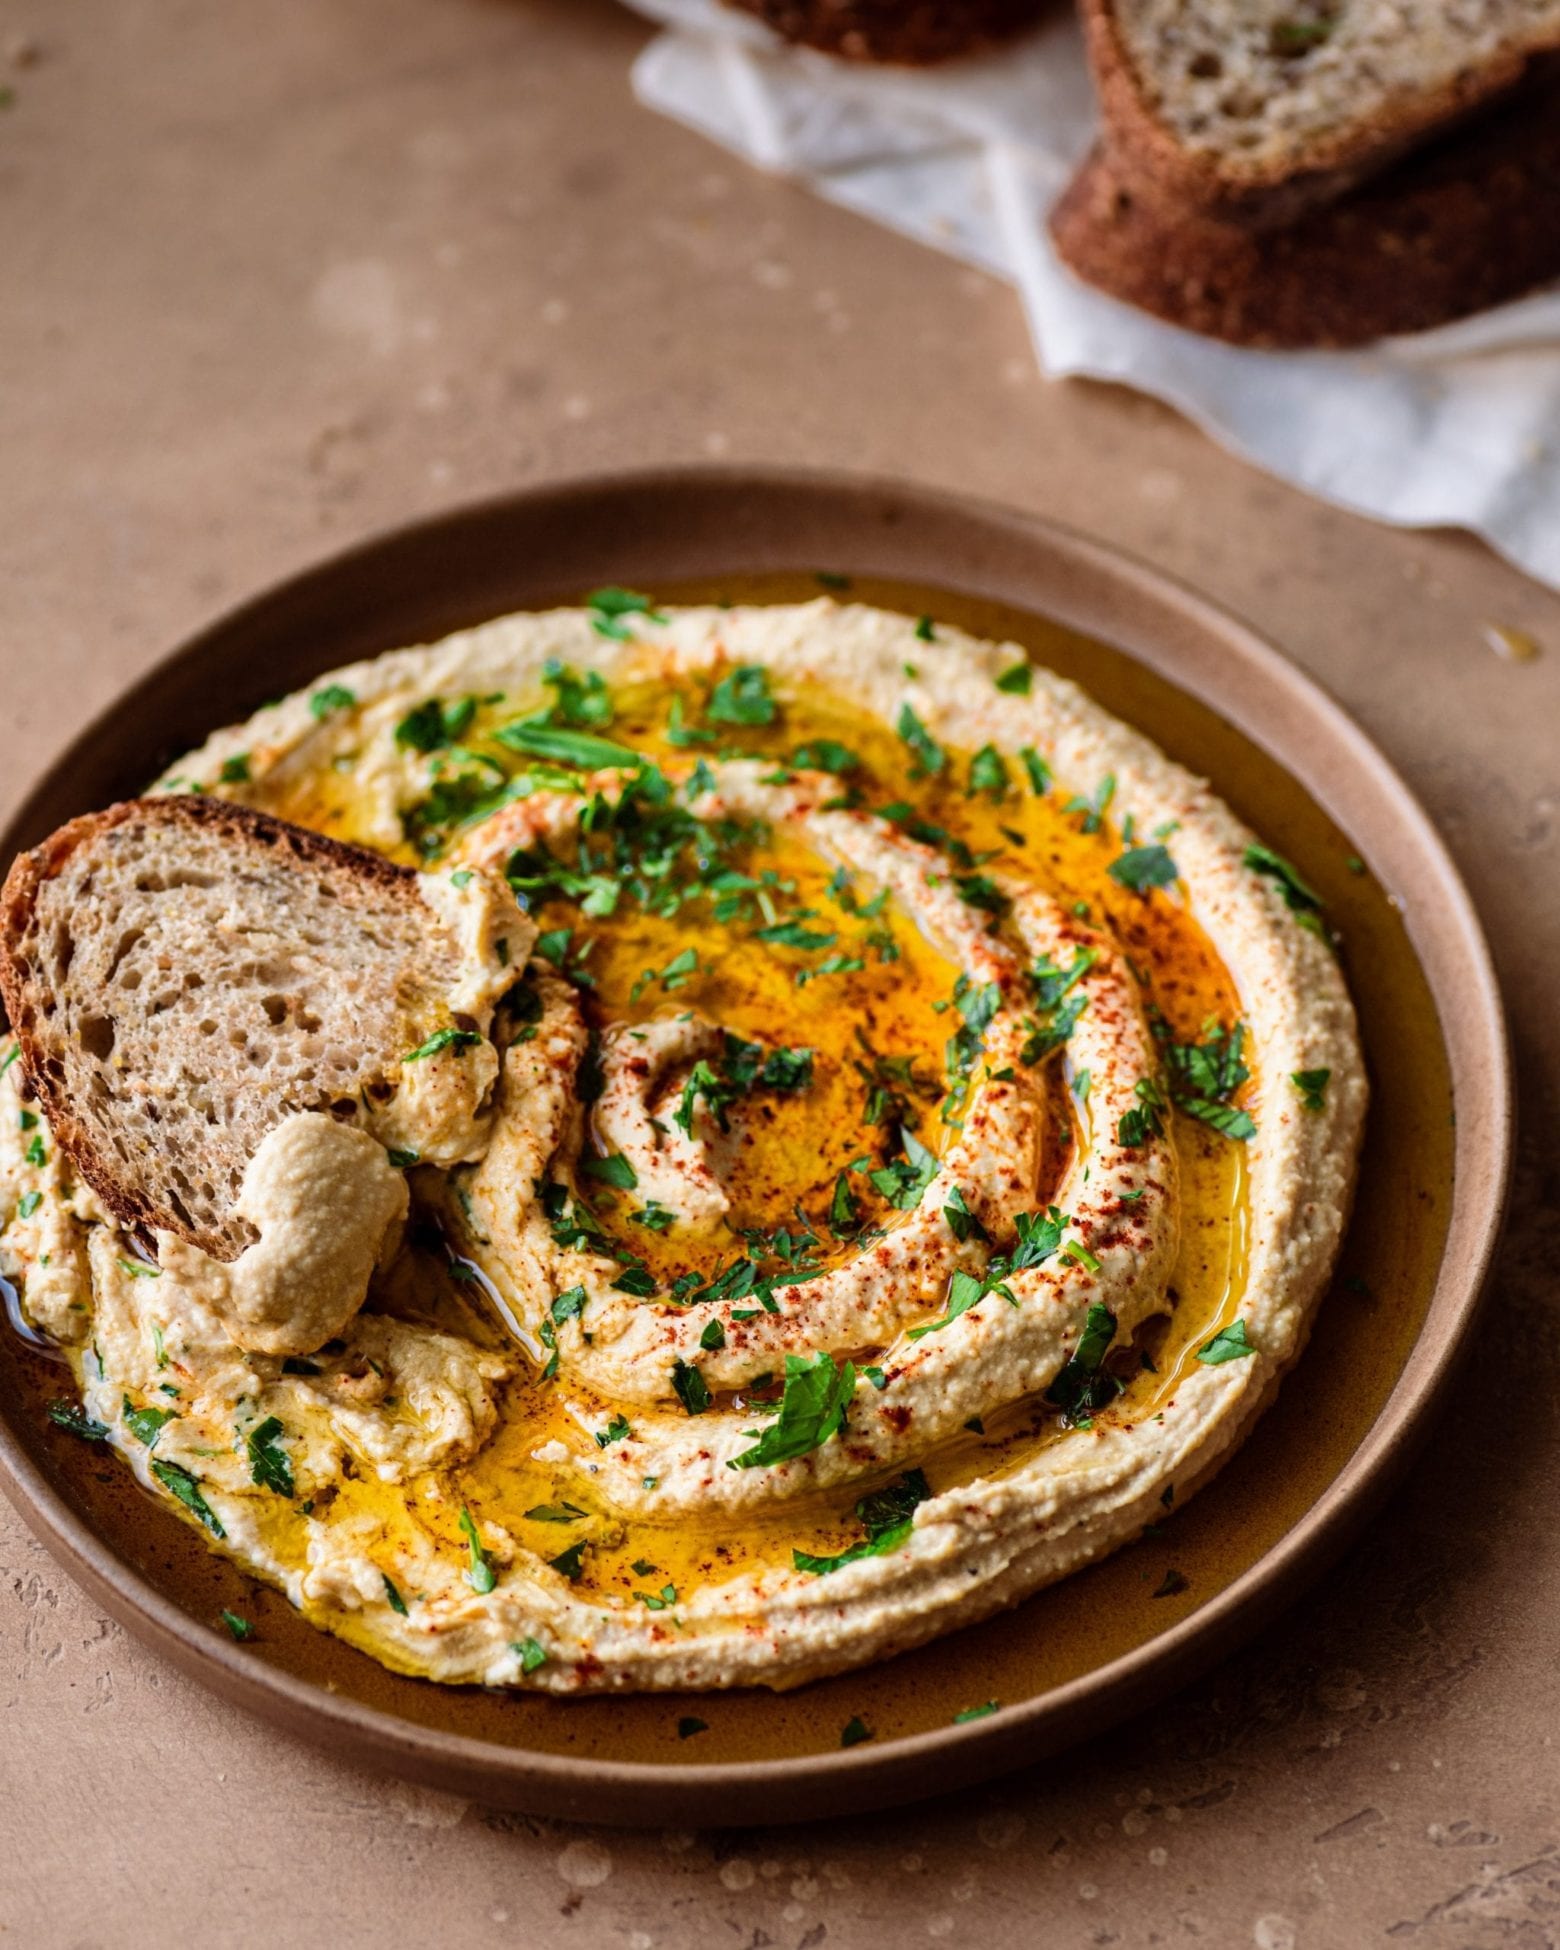 plate of swirled hummus with olive oil and parsley, and hunk of bread dipped in